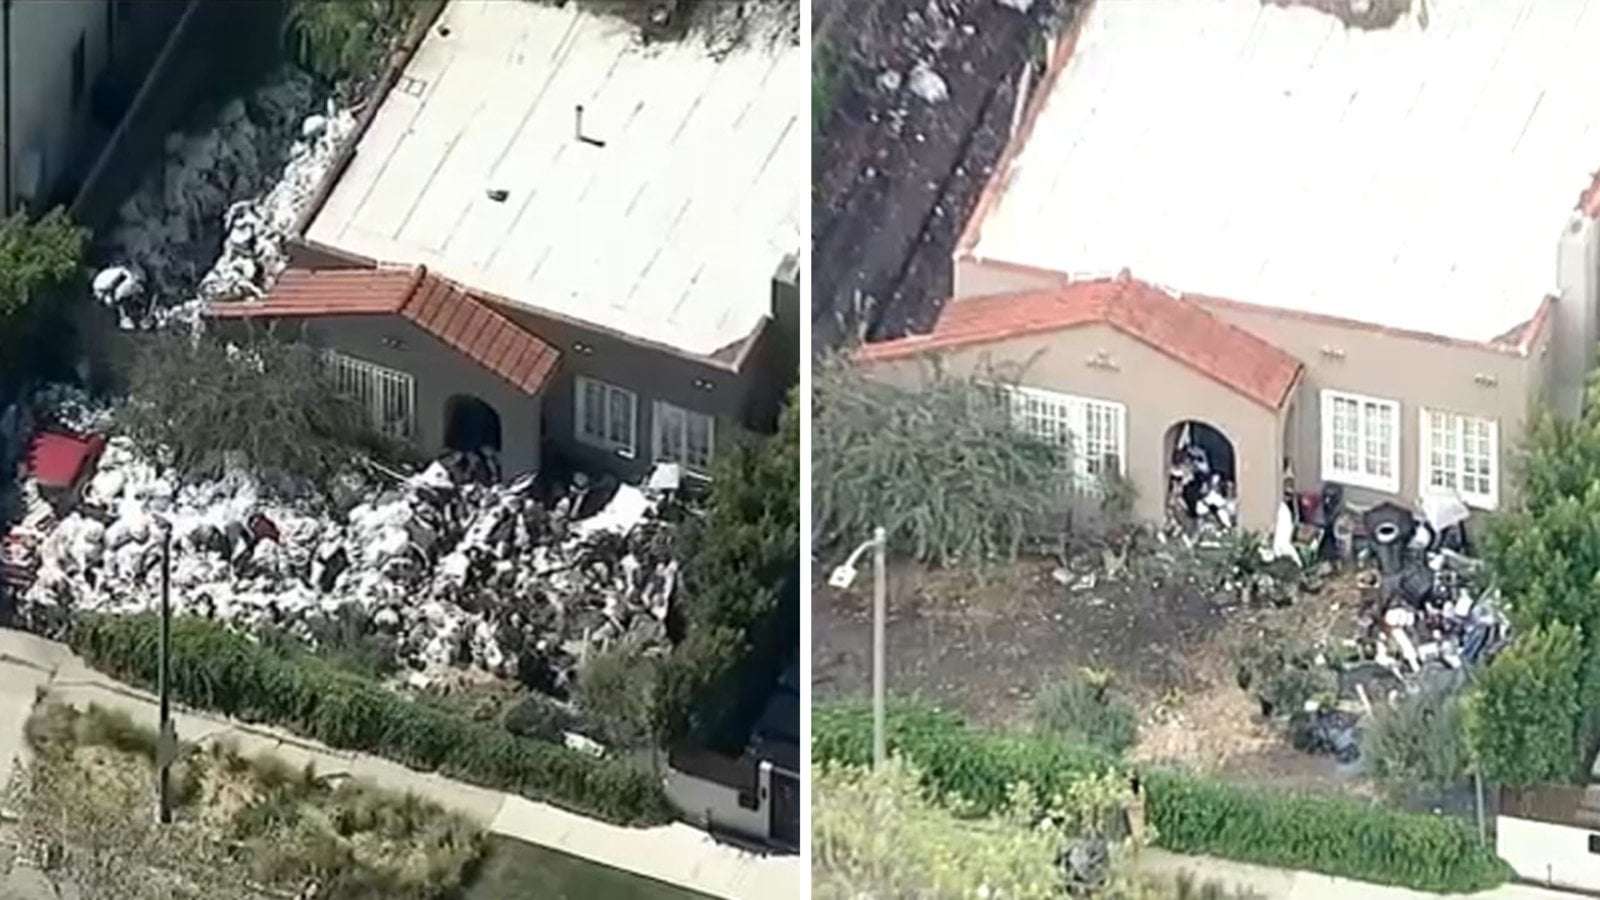 image for More than 7 tons of trash removed from Fairfax District home so far, city says